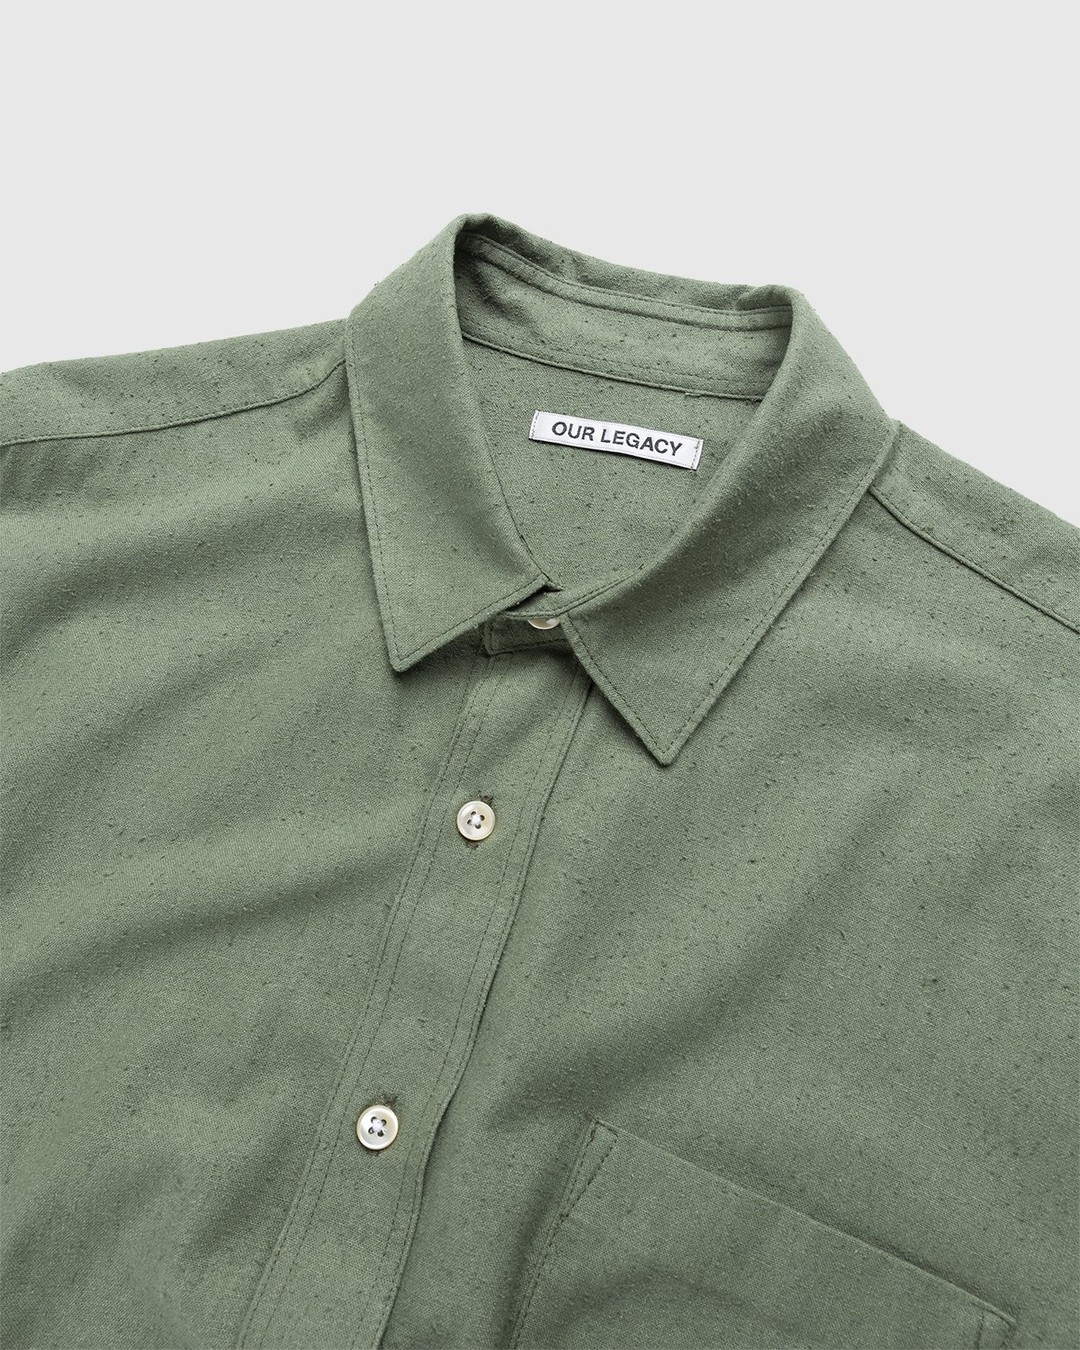 Our Legacy – Classic Shirt Ivy Green - Longsleeve Shirts - Green - Image 6